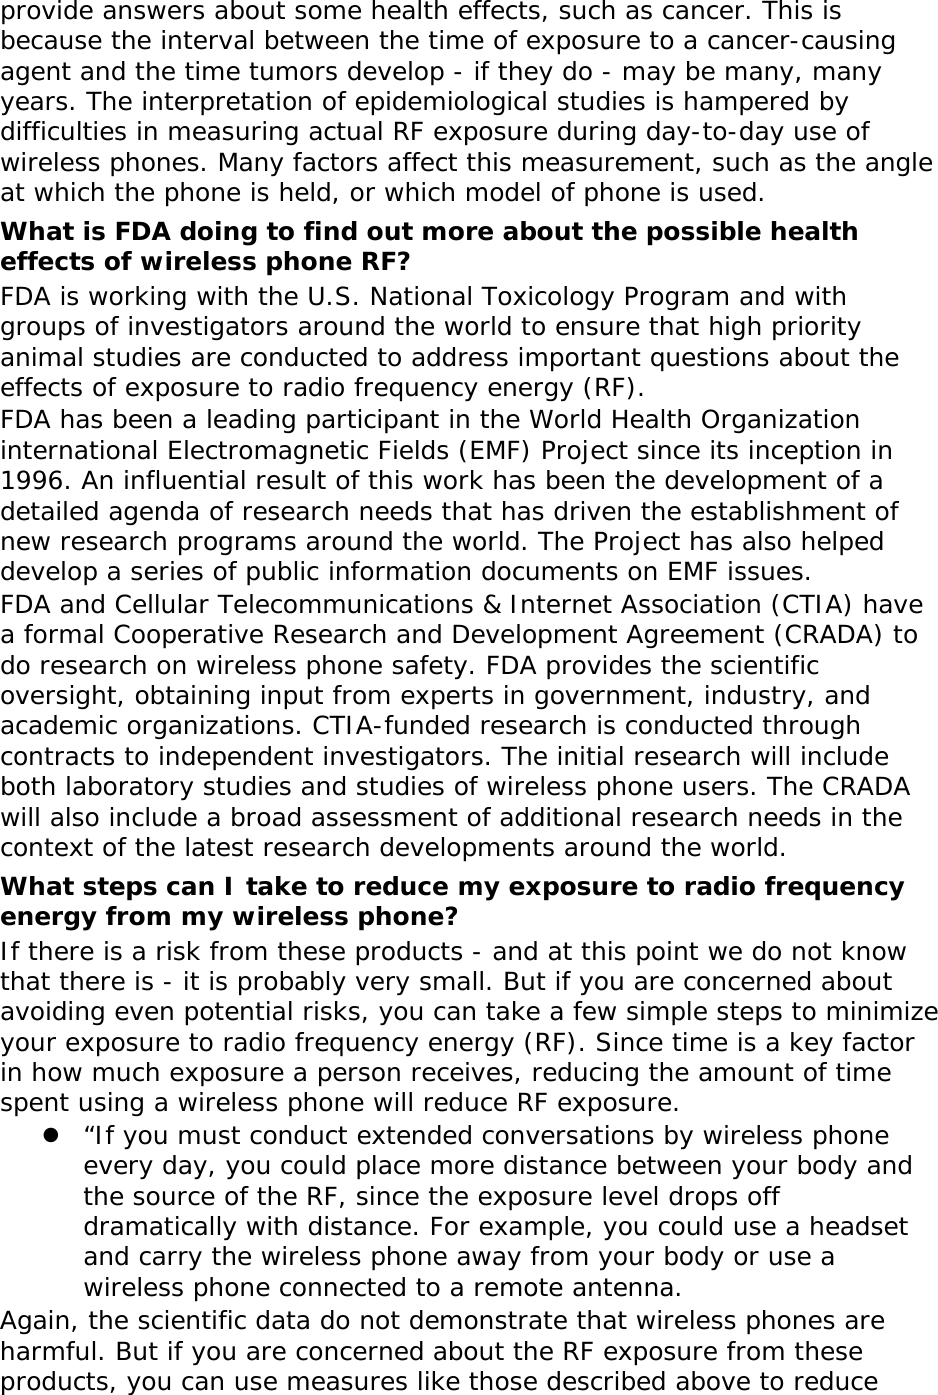 provide answers about some health effects, such as cancer. This is because the interval between the time of exposure to a cancer-causing agent and the time tumors develop - if they do - may be many, many years. The interpretation of epidemiological studies is hampered by difficulties in measuring actual RF exposure during day-to-day use of wireless phones. Many factors affect this measurement, such as the angle at which the phone is held, or which model of phone is used. What is FDA doing to find out more about the possible health effects of wireless phone RF? FDA is working with the U.S. National Toxicology Program and with groups of investigators around the world to ensure that high priority animal studies are conducted to address important questions about the effects of exposure to radio frequency energy (RF). FDA has been a leading participant in the World Health Organization international Electromagnetic Fields (EMF) Project since its inception in 1996. An influential result of this work has been the development of a detailed agenda of research needs that has driven the establishment of new research programs around the world. The Project has also helped develop a series of public information documents on EMF issues. FDA and Cellular Telecommunications &amp; Internet Association (CTIA) have a formal Cooperative Research and Development Agreement (CRADA) to do research on wireless phone safety. FDA provides the scientific oversight, obtaining input from experts in government, industry, and academic organizations. CTIA-funded research is conducted through contracts to independent investigators. The initial research will include both laboratory studies and studies of wireless phone users. The CRADA will also include a broad assessment of additional research needs in the context of the latest research developments around the world. What steps can I take to reduce my exposure to radio frequency energy from my wireless phone? If there is a risk from these products - and at this point we do not know that there is - it is probably very small. But if you are concerned about avoiding even potential risks, you can take a few simple steps to minimize your exposure to radio frequency energy (RF). Since time is a key factor in how much exposure a person receives, reducing the amount of time spent using a wireless phone will reduce RF exposure. z “If you must conduct extended conversations by wireless phone every day, you could place more distance between your body and the source of the RF, since the exposure level drops off dramatically with distance. For example, you could use a headset and carry the wireless phone away from your body or use a wireless phone connected to a remote antenna. Again, the scientific data do not demonstrate that wireless phones are harmful. But if you are concerned about the RF exposure from these products, you can use measures like those described above to reduce 